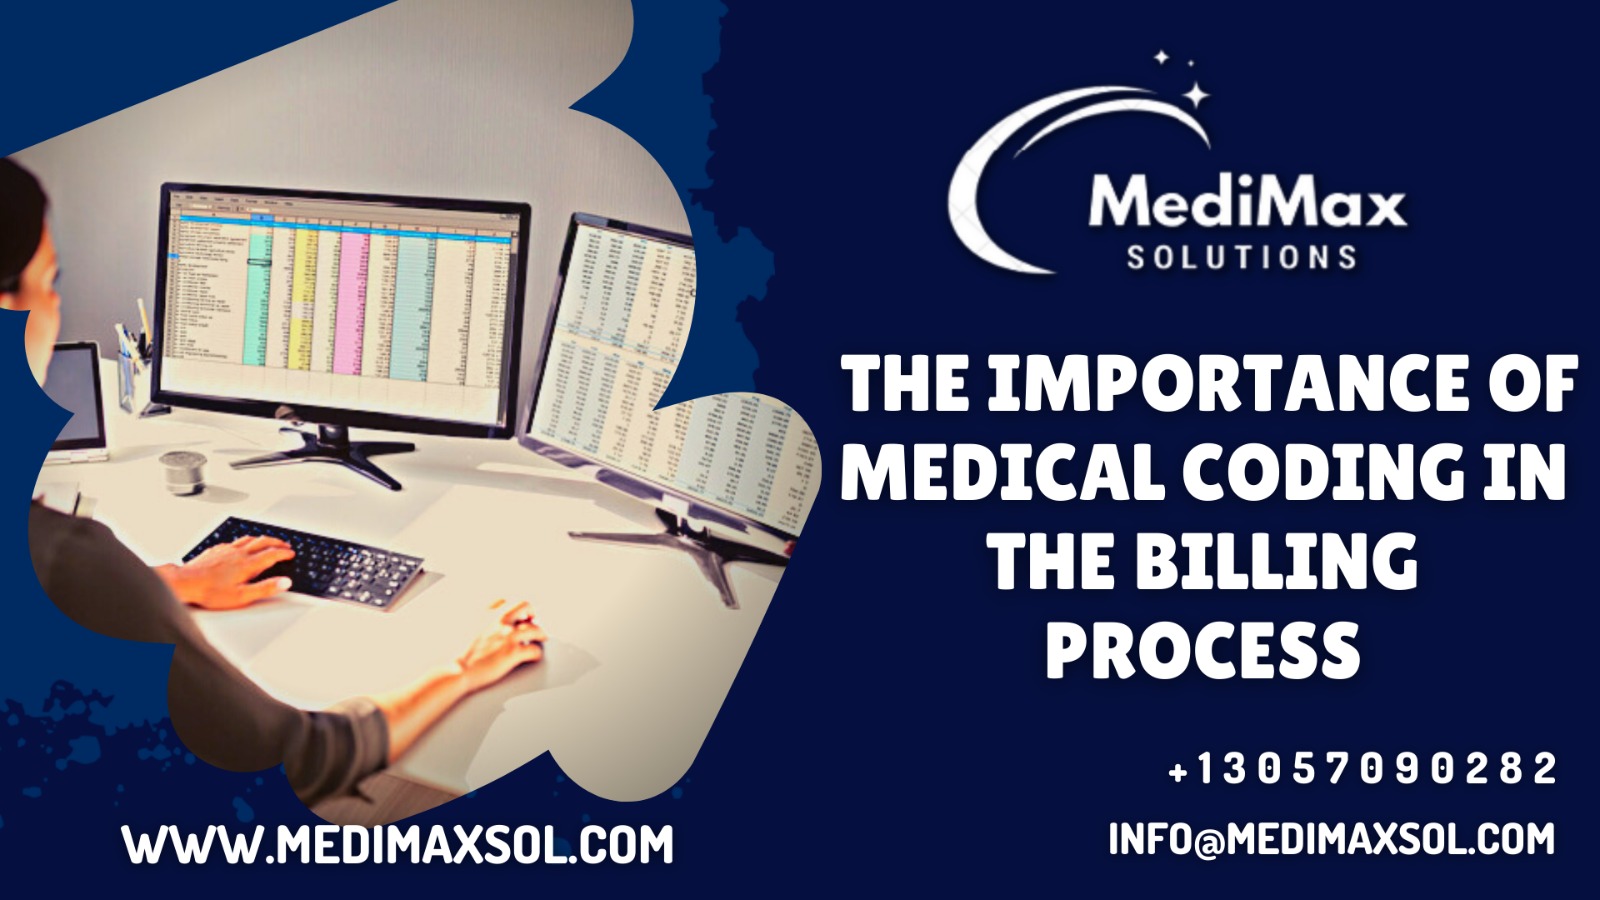 The importance of medical coding in the billing process